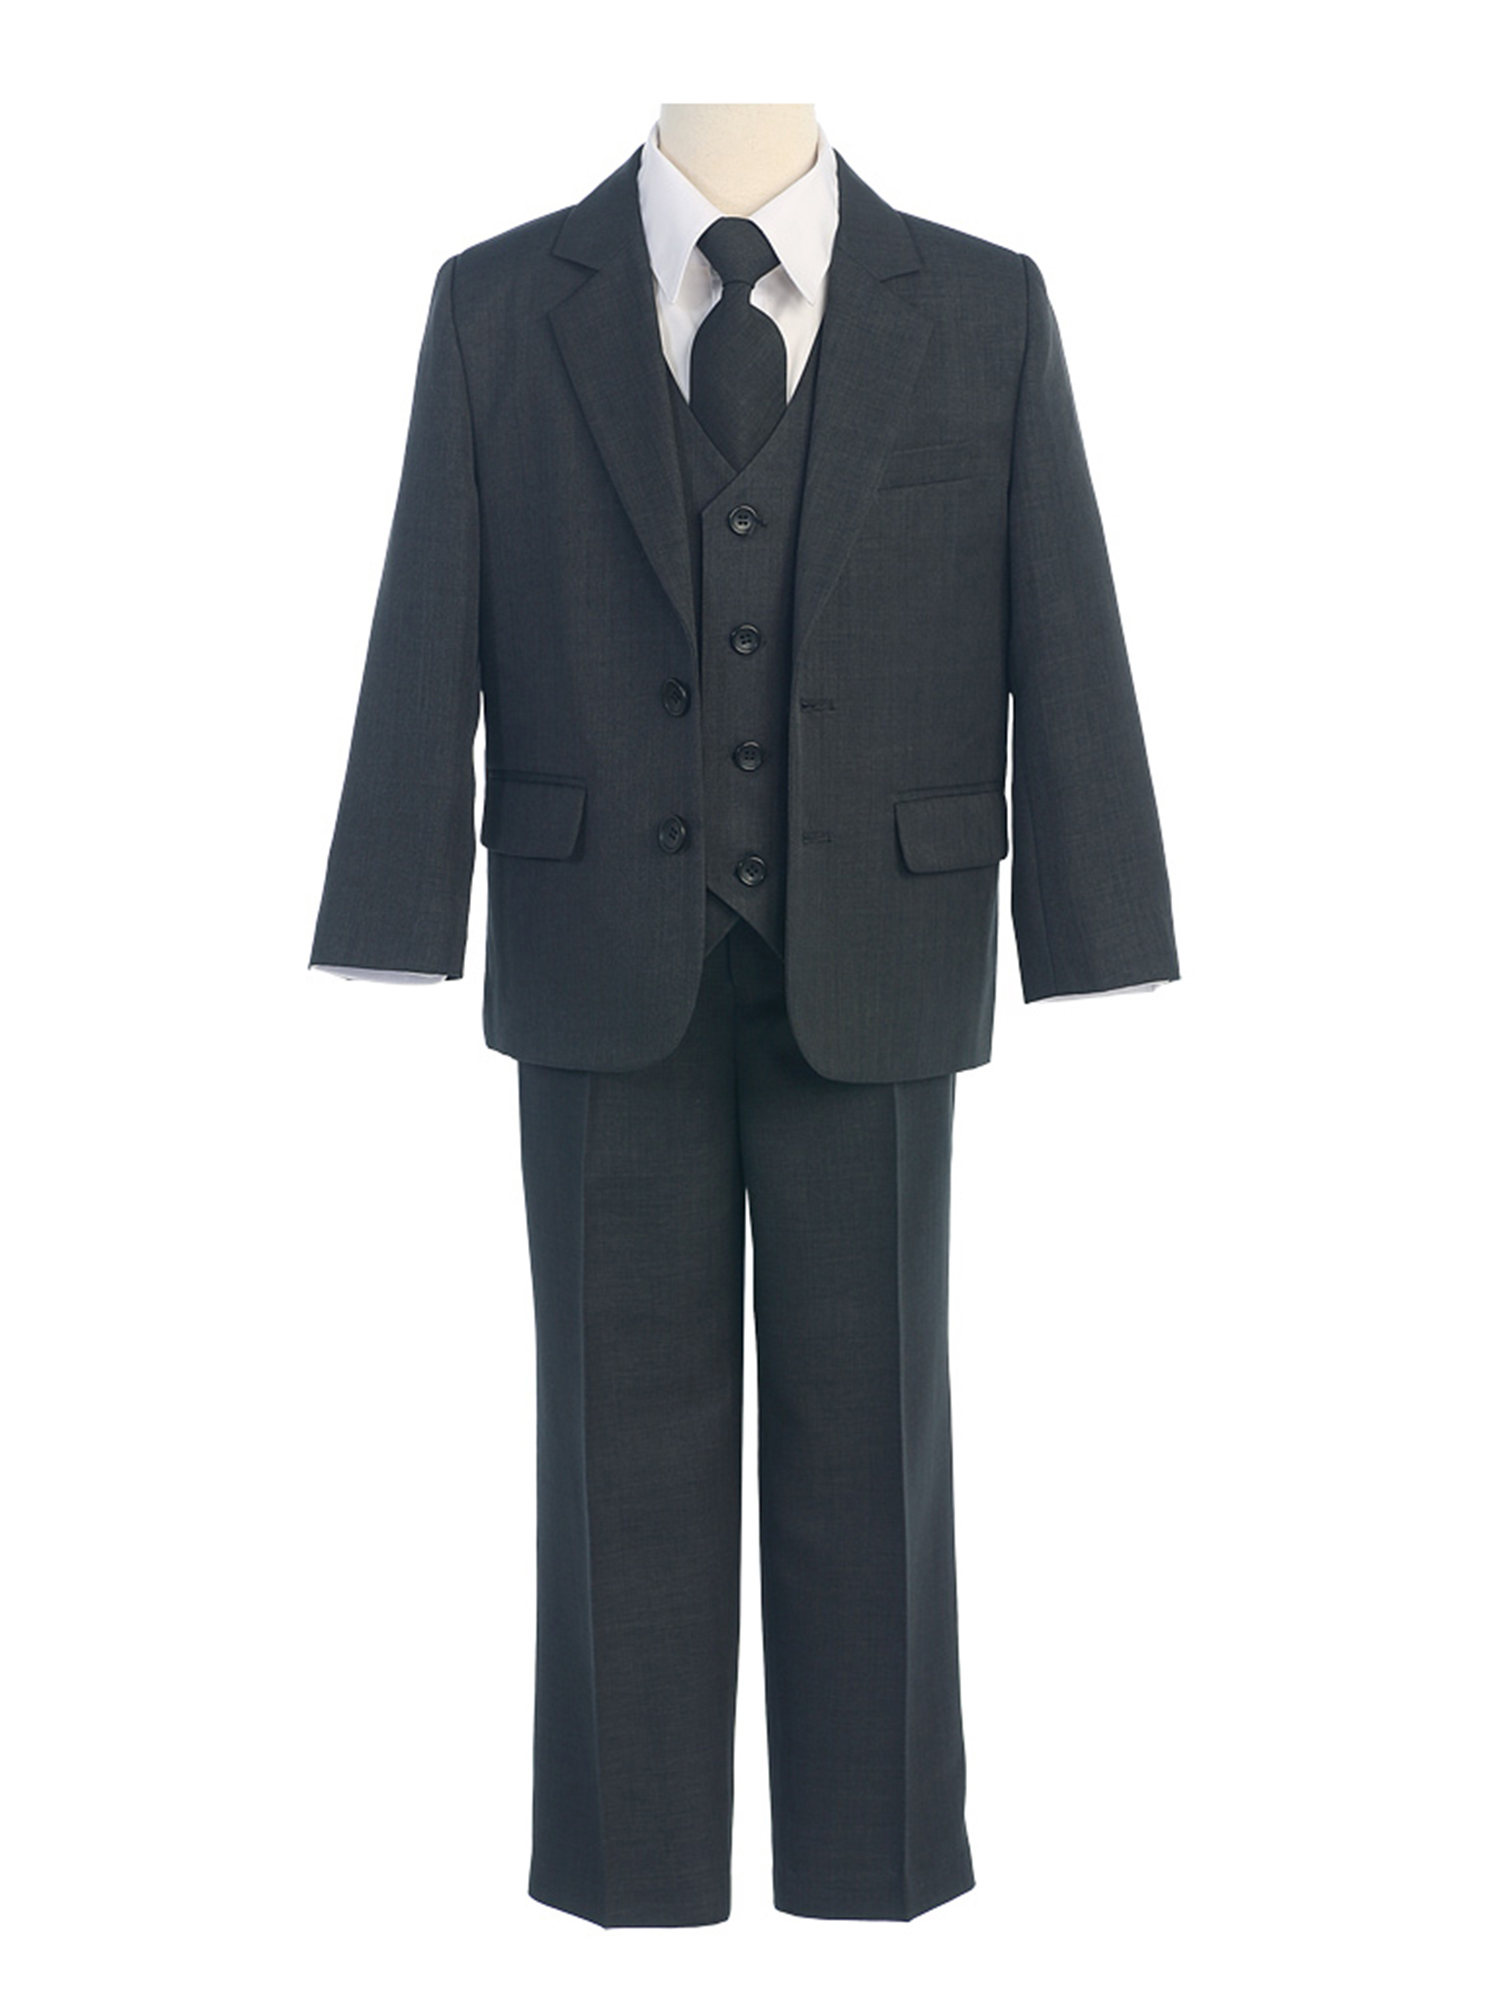 COLE Boys Suit with Shirt and Vest (5-Piece) - (14 Husky, Charcoal Grey)